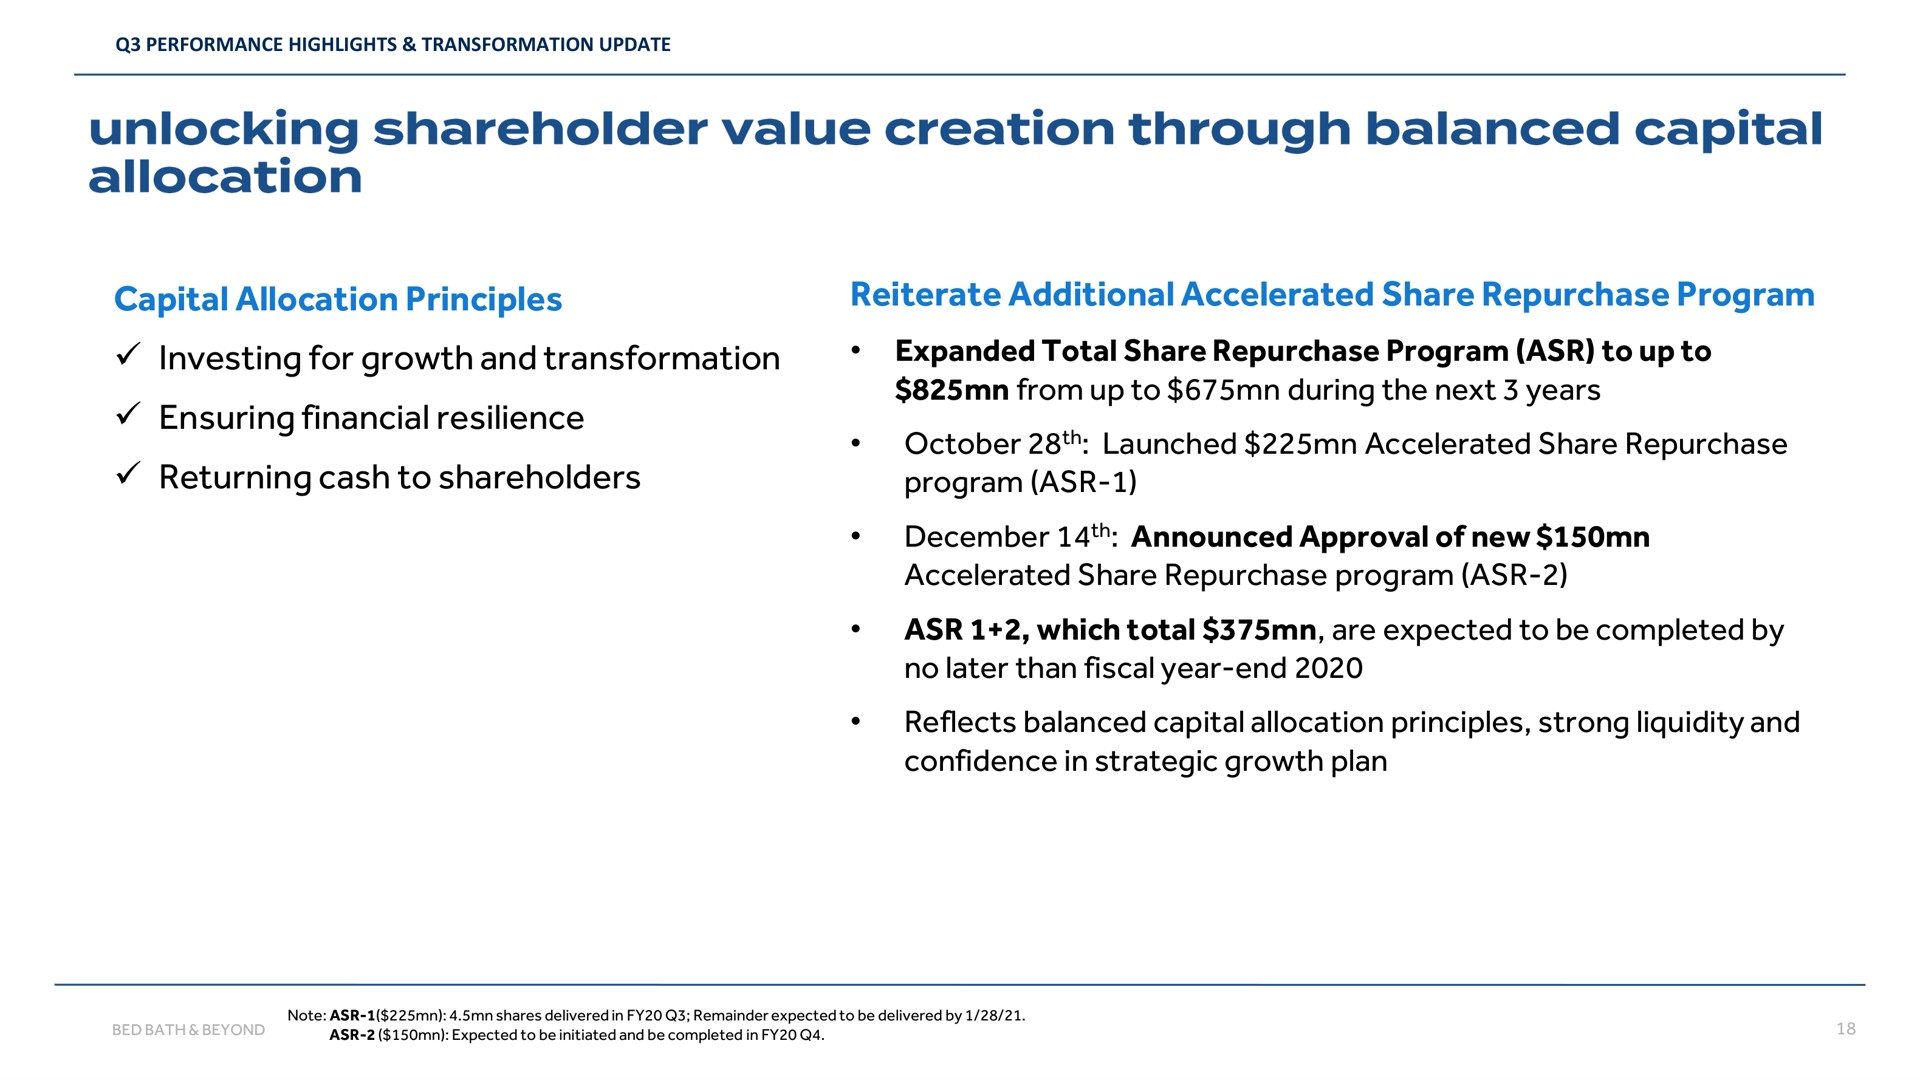 capital allocation principles investing for growth and transformation ensuring financial resilience returning cash to shareholders reiterate additional accelerated share repurchase program expanded total share repurchase program to up to from up to during the next years launched accelerated share repurchase program announced approval of new accelerated share repurchase program which total are expected to be completed by no later than fiscal year end reflects balanced capital allocation principles strong liquidity and confidence in strategic growth plan unlocking shareholder value creation through | Bed Bath & Beyond